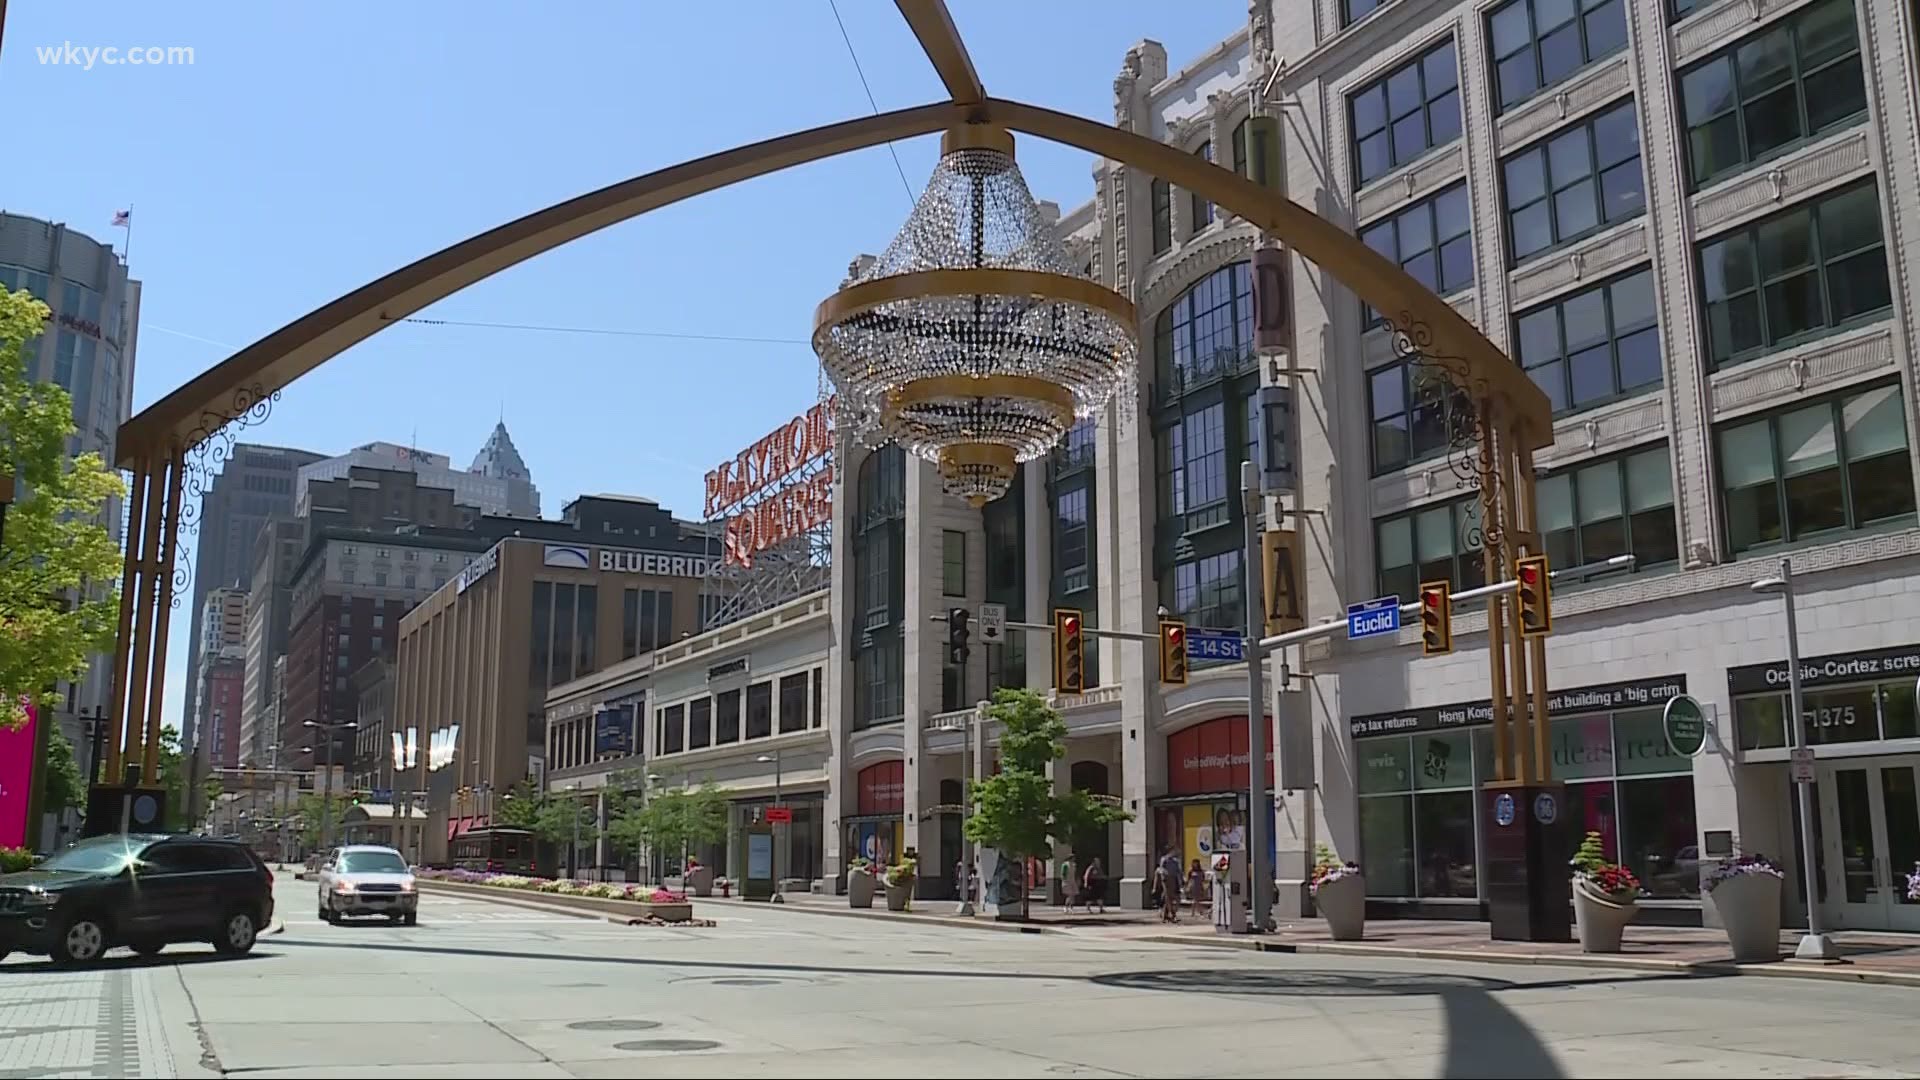 One year ago this week, it was announced Playhouse square was cancelling shows.  Now, however, there appears to be a light at the end of the tunnel.